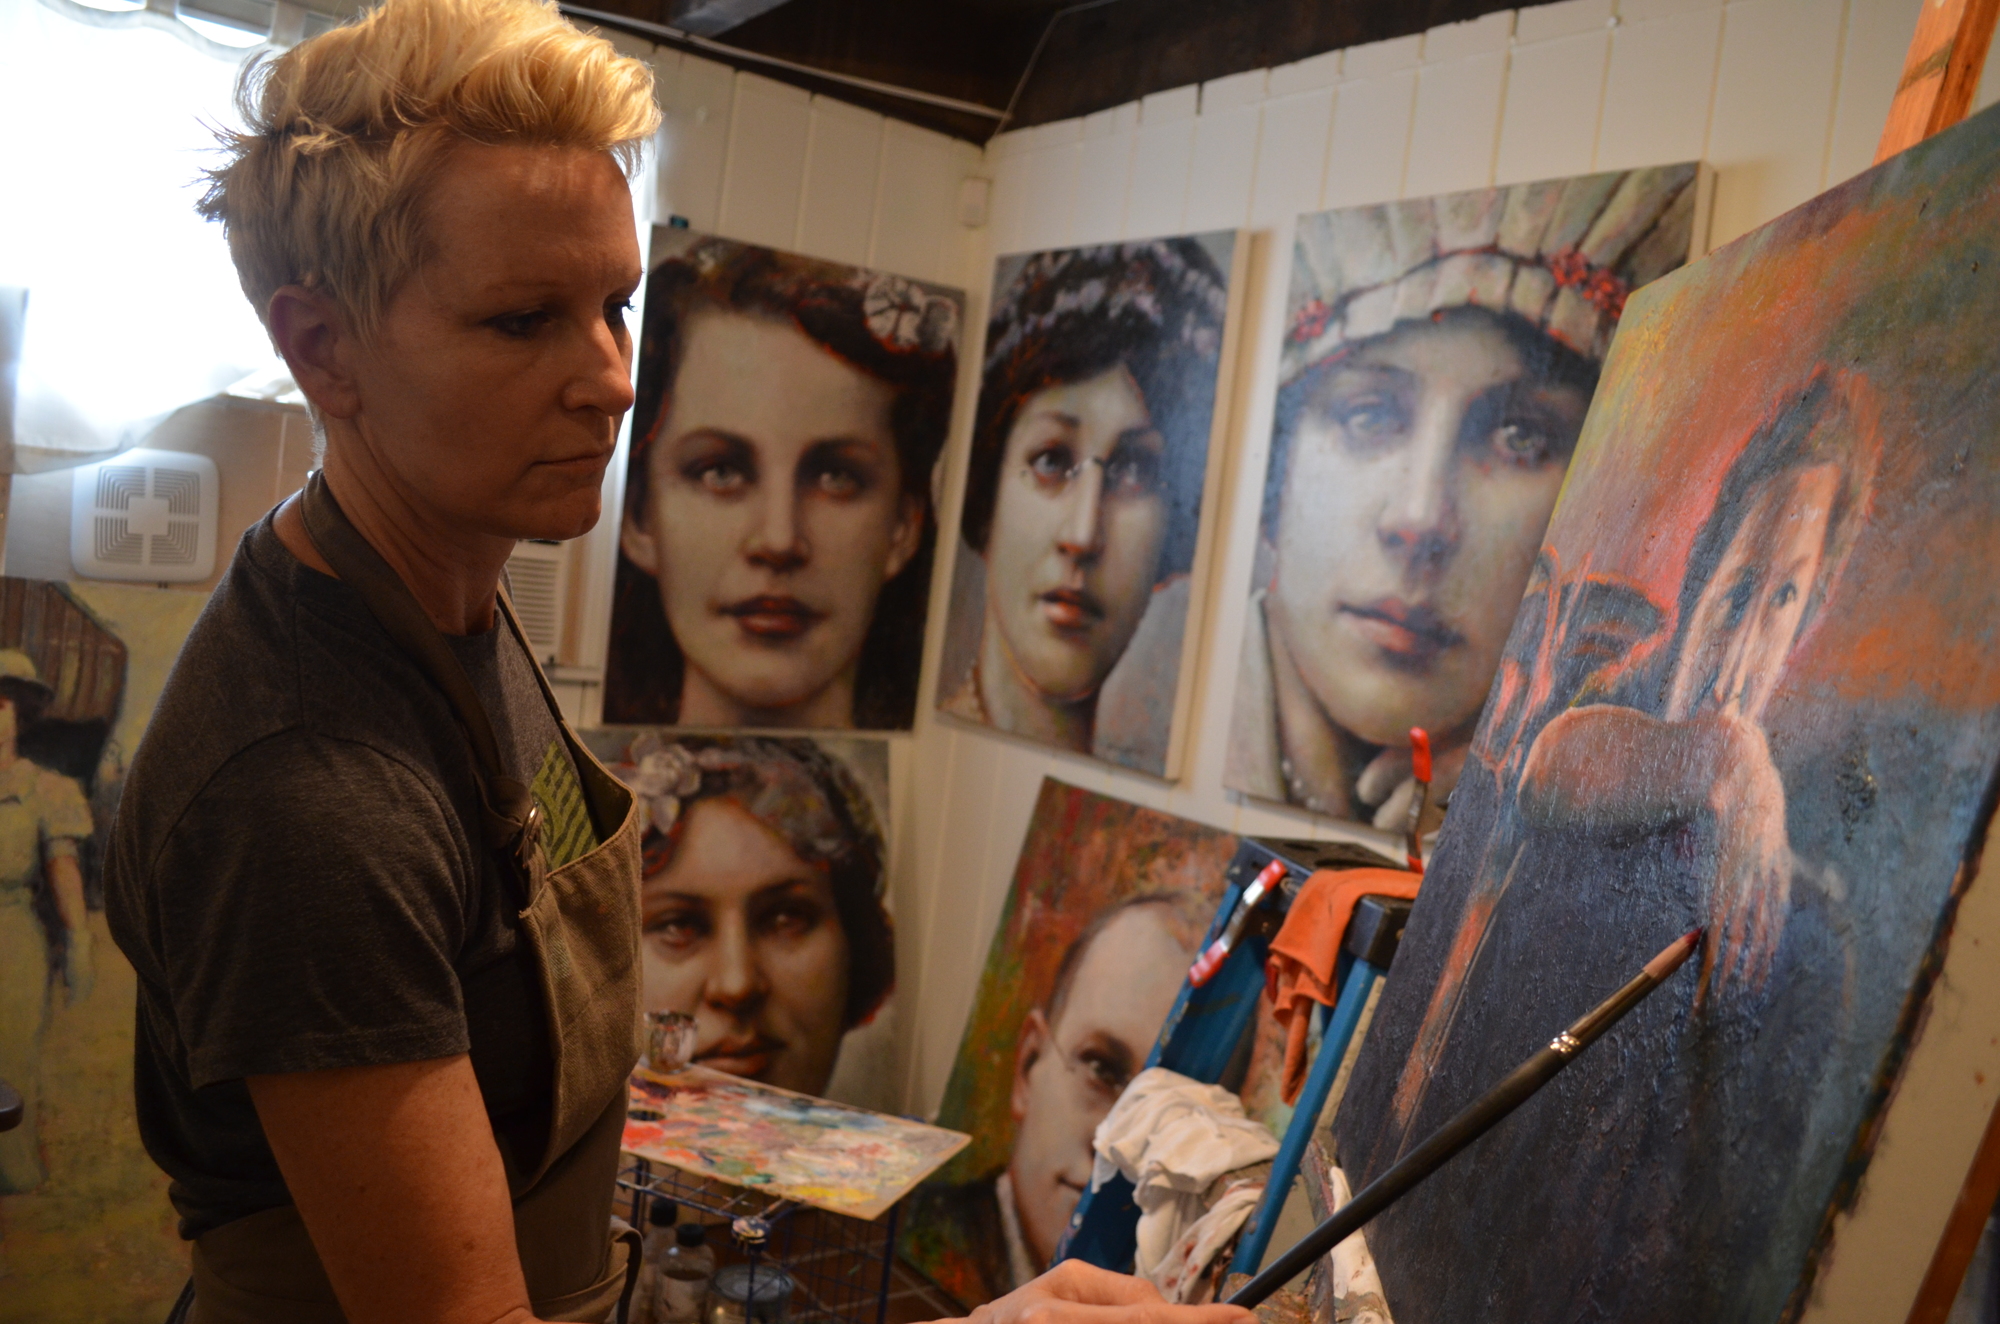 Victoria Arendt puts the final touches on a recent painting.